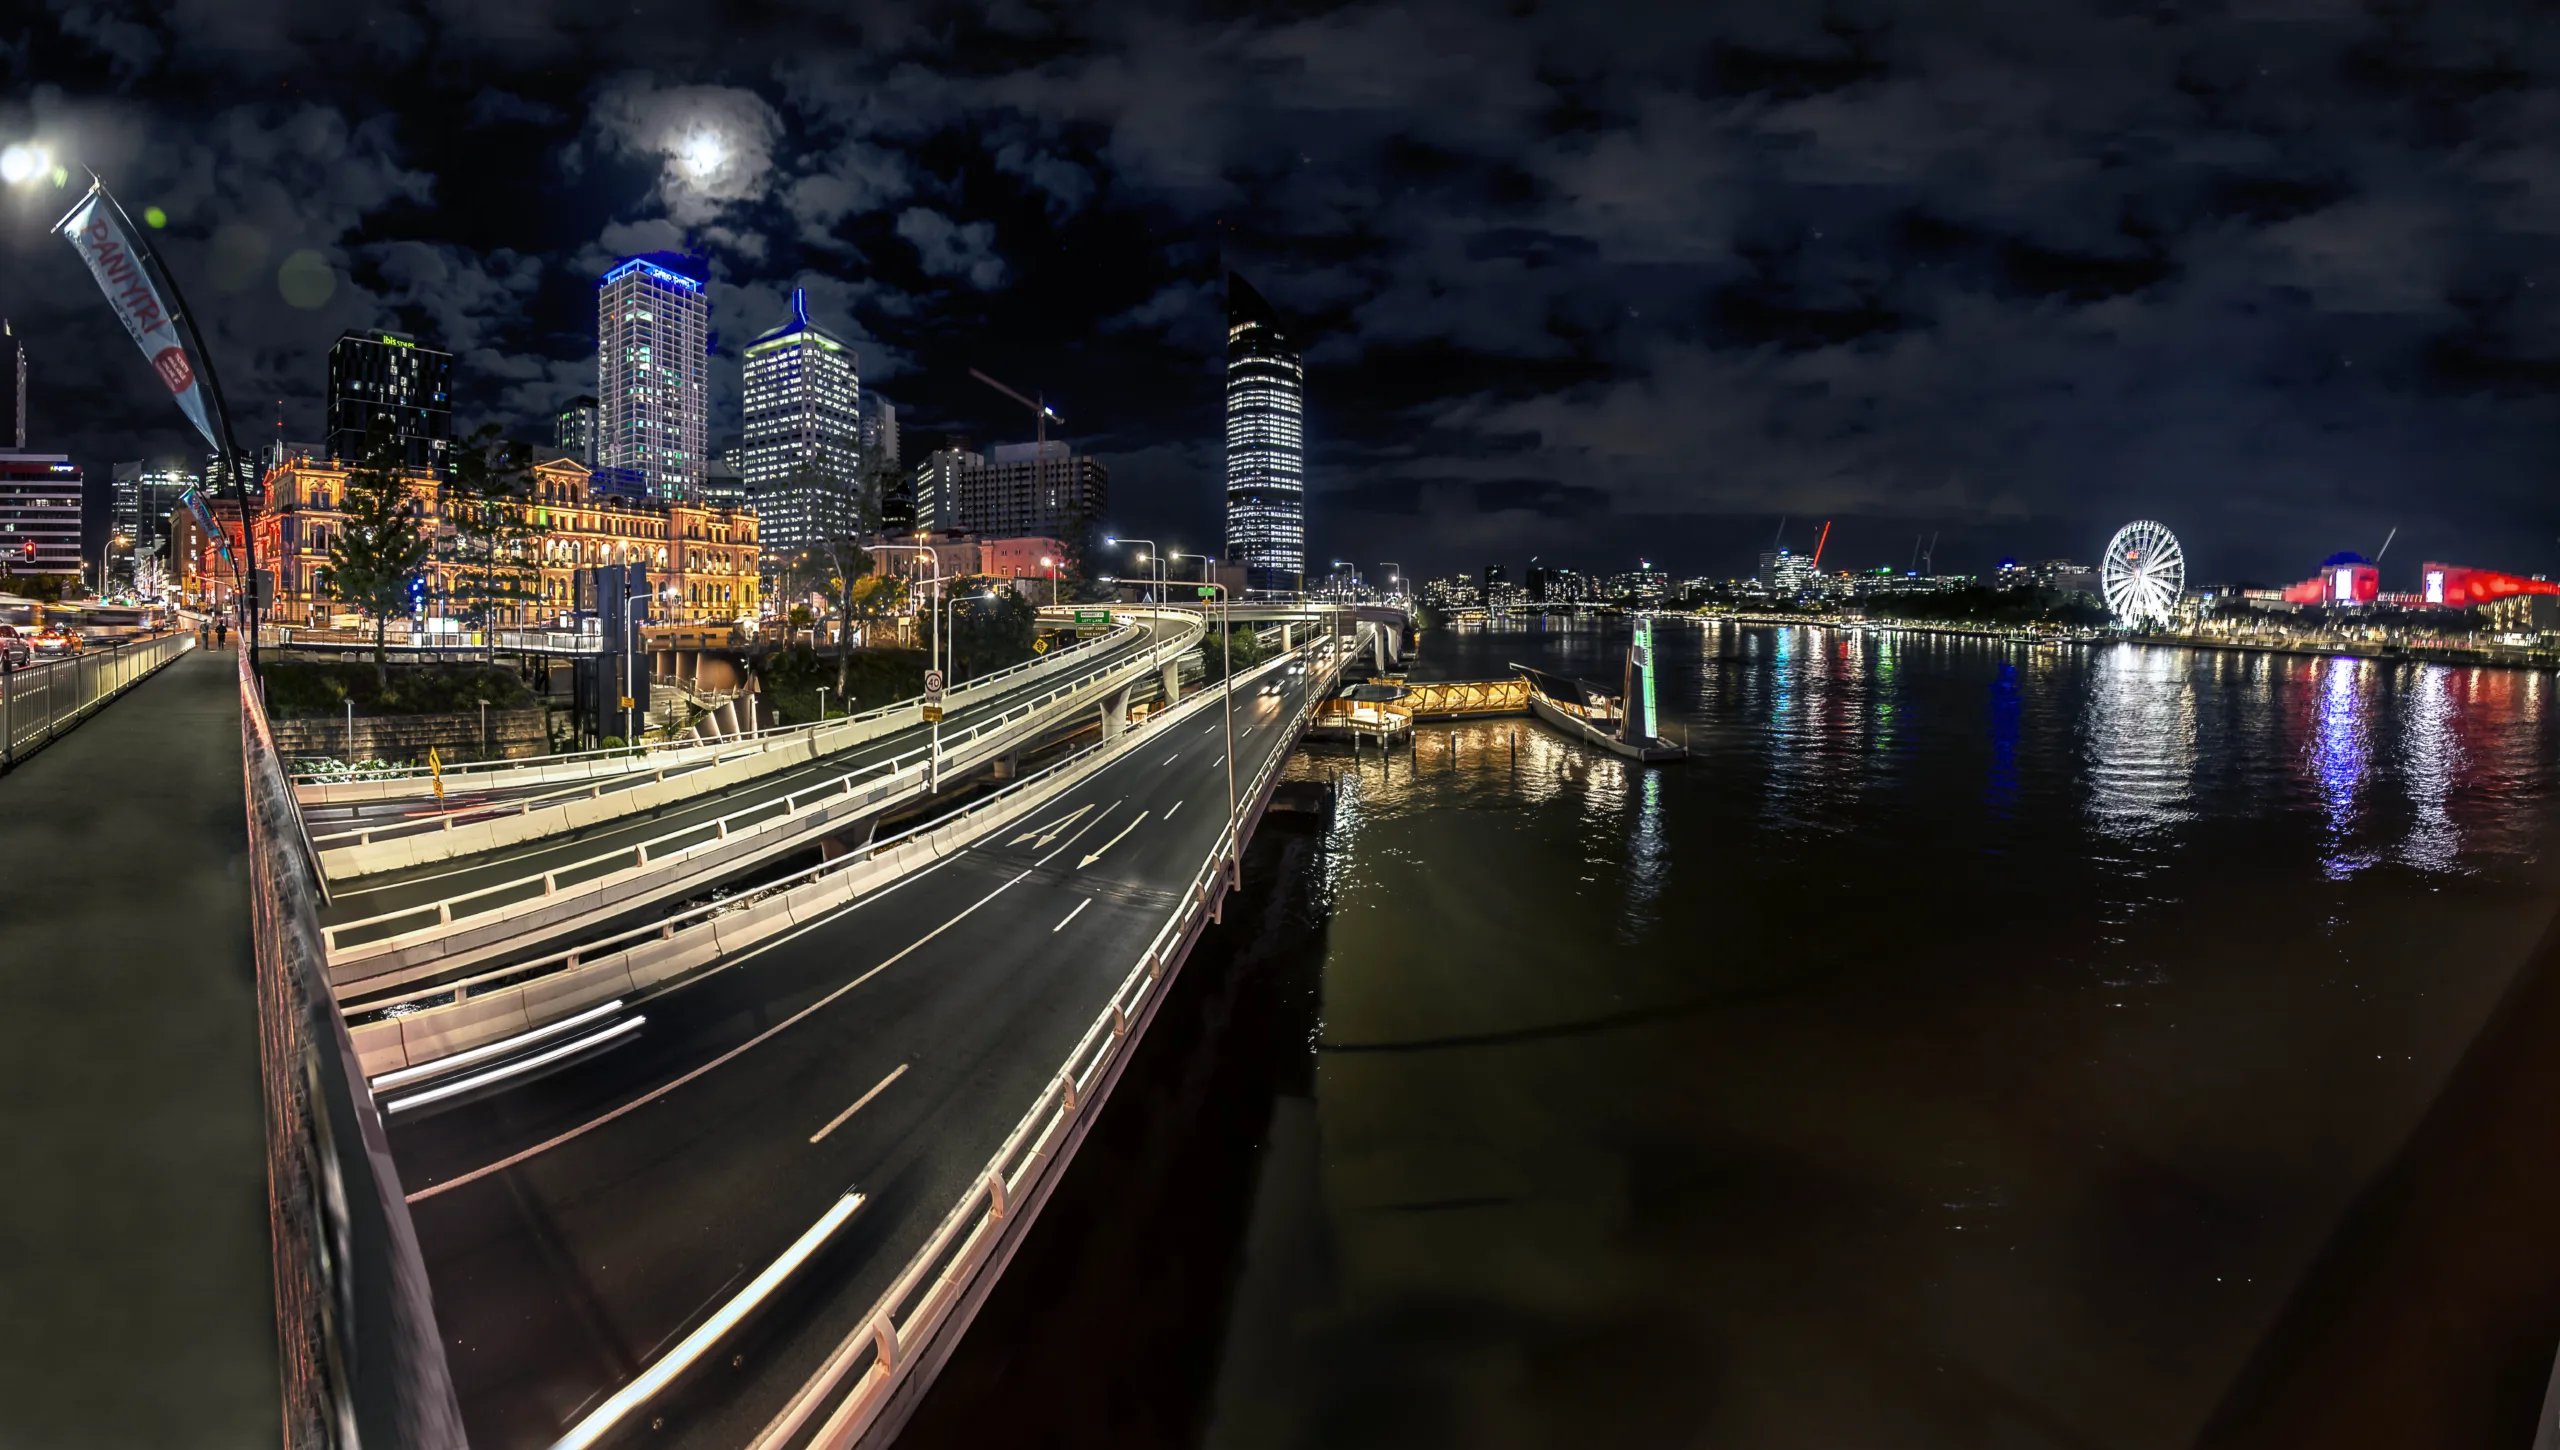 Brisbane River at night with city lights reflecting on the water.